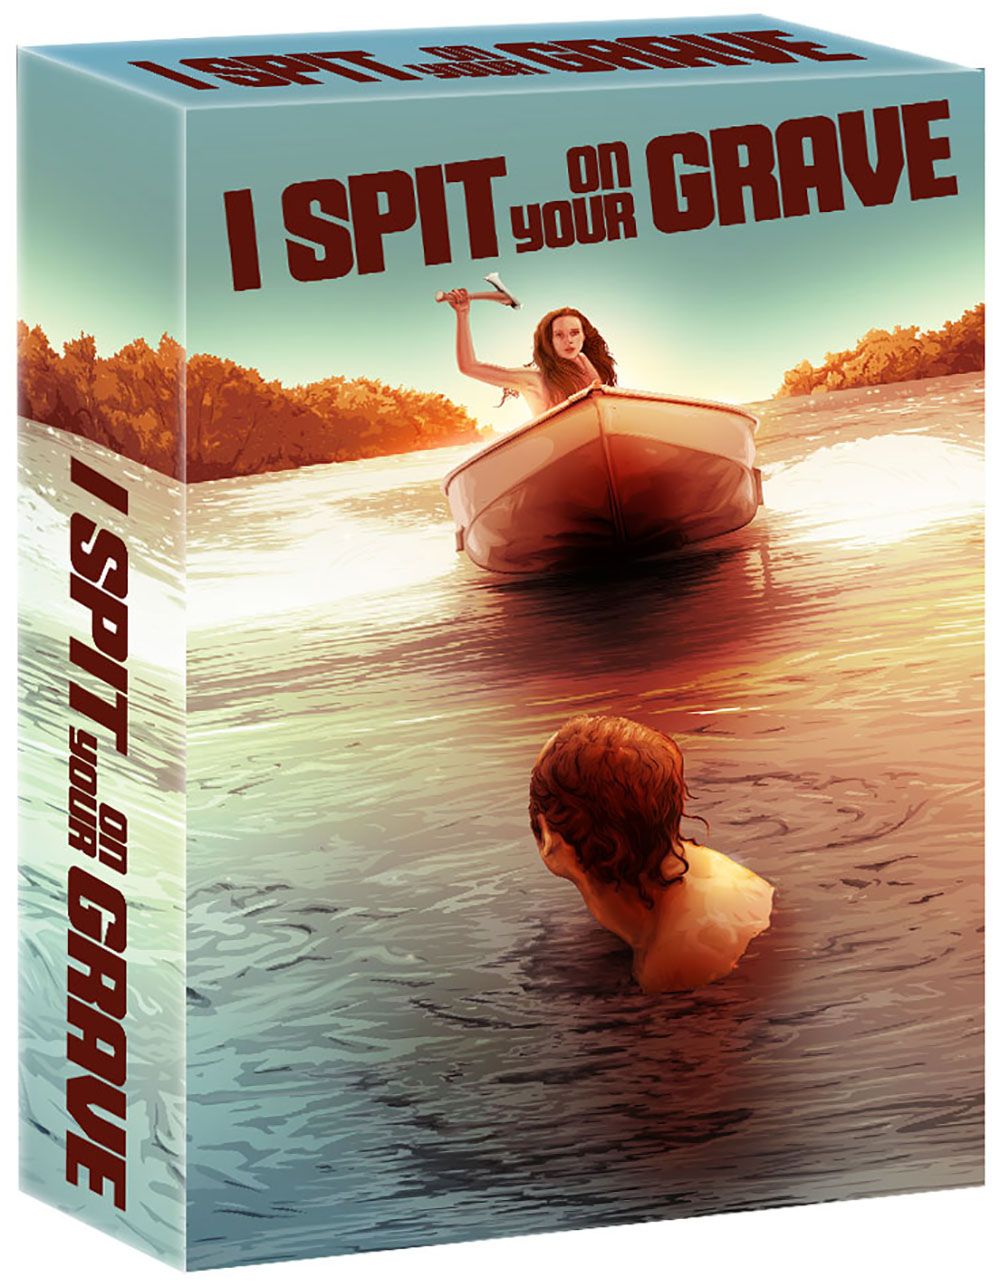 I SPIT ON YOUR GRAVE BLU-RAY BOX SET (3 DISC SET)